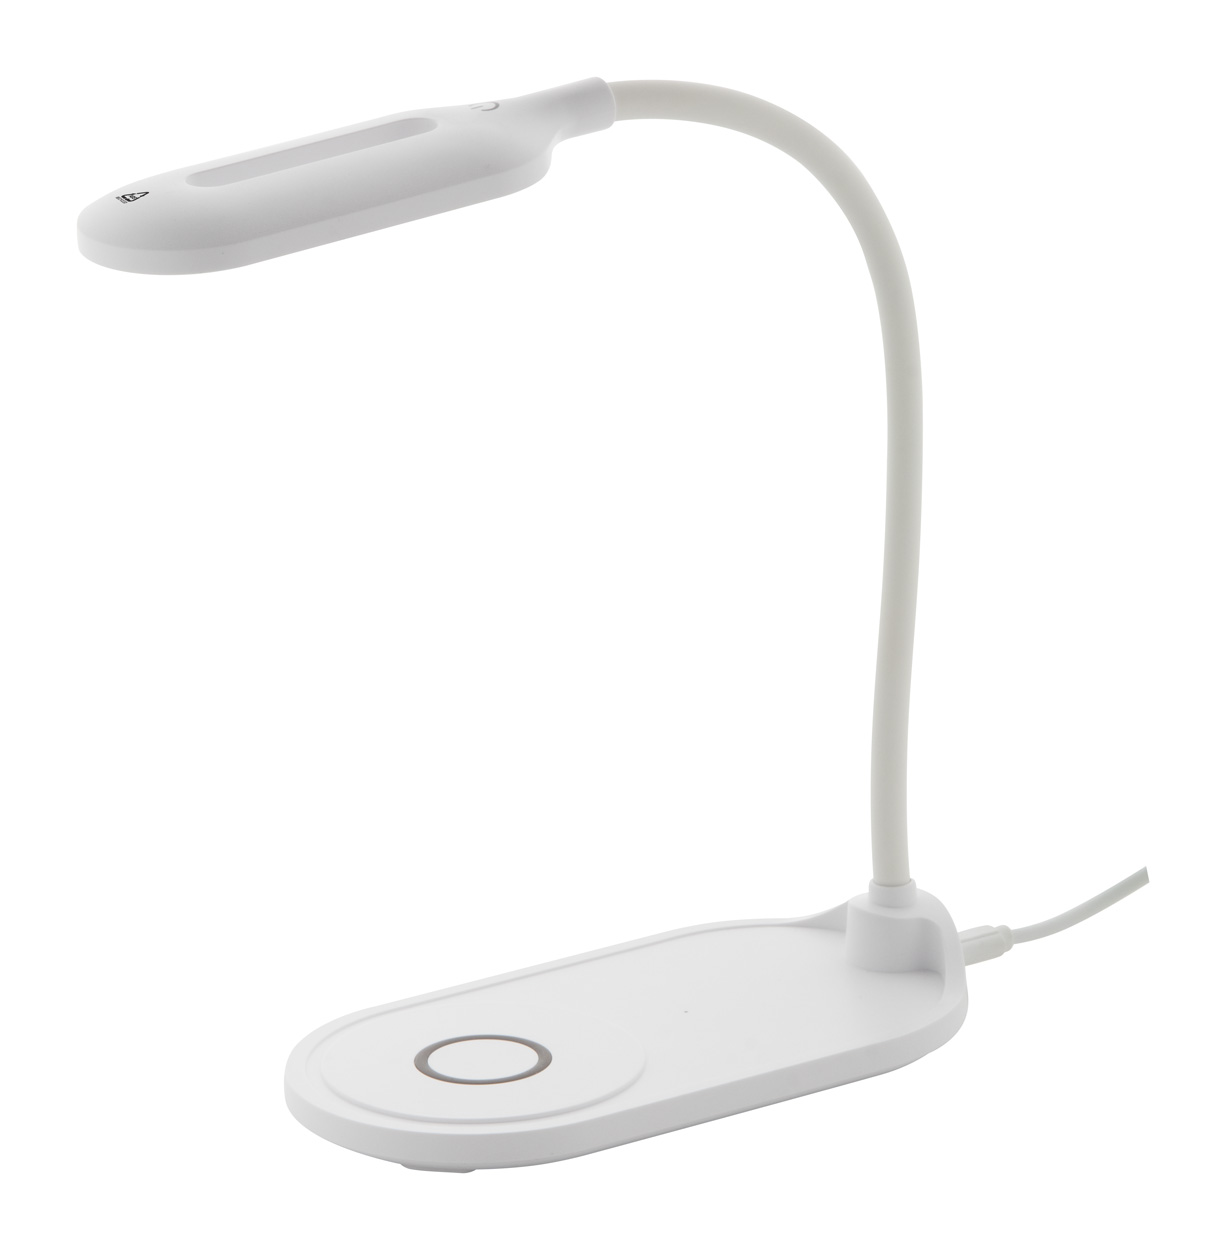 Galaxy Table multifunctional lamp RABS - white